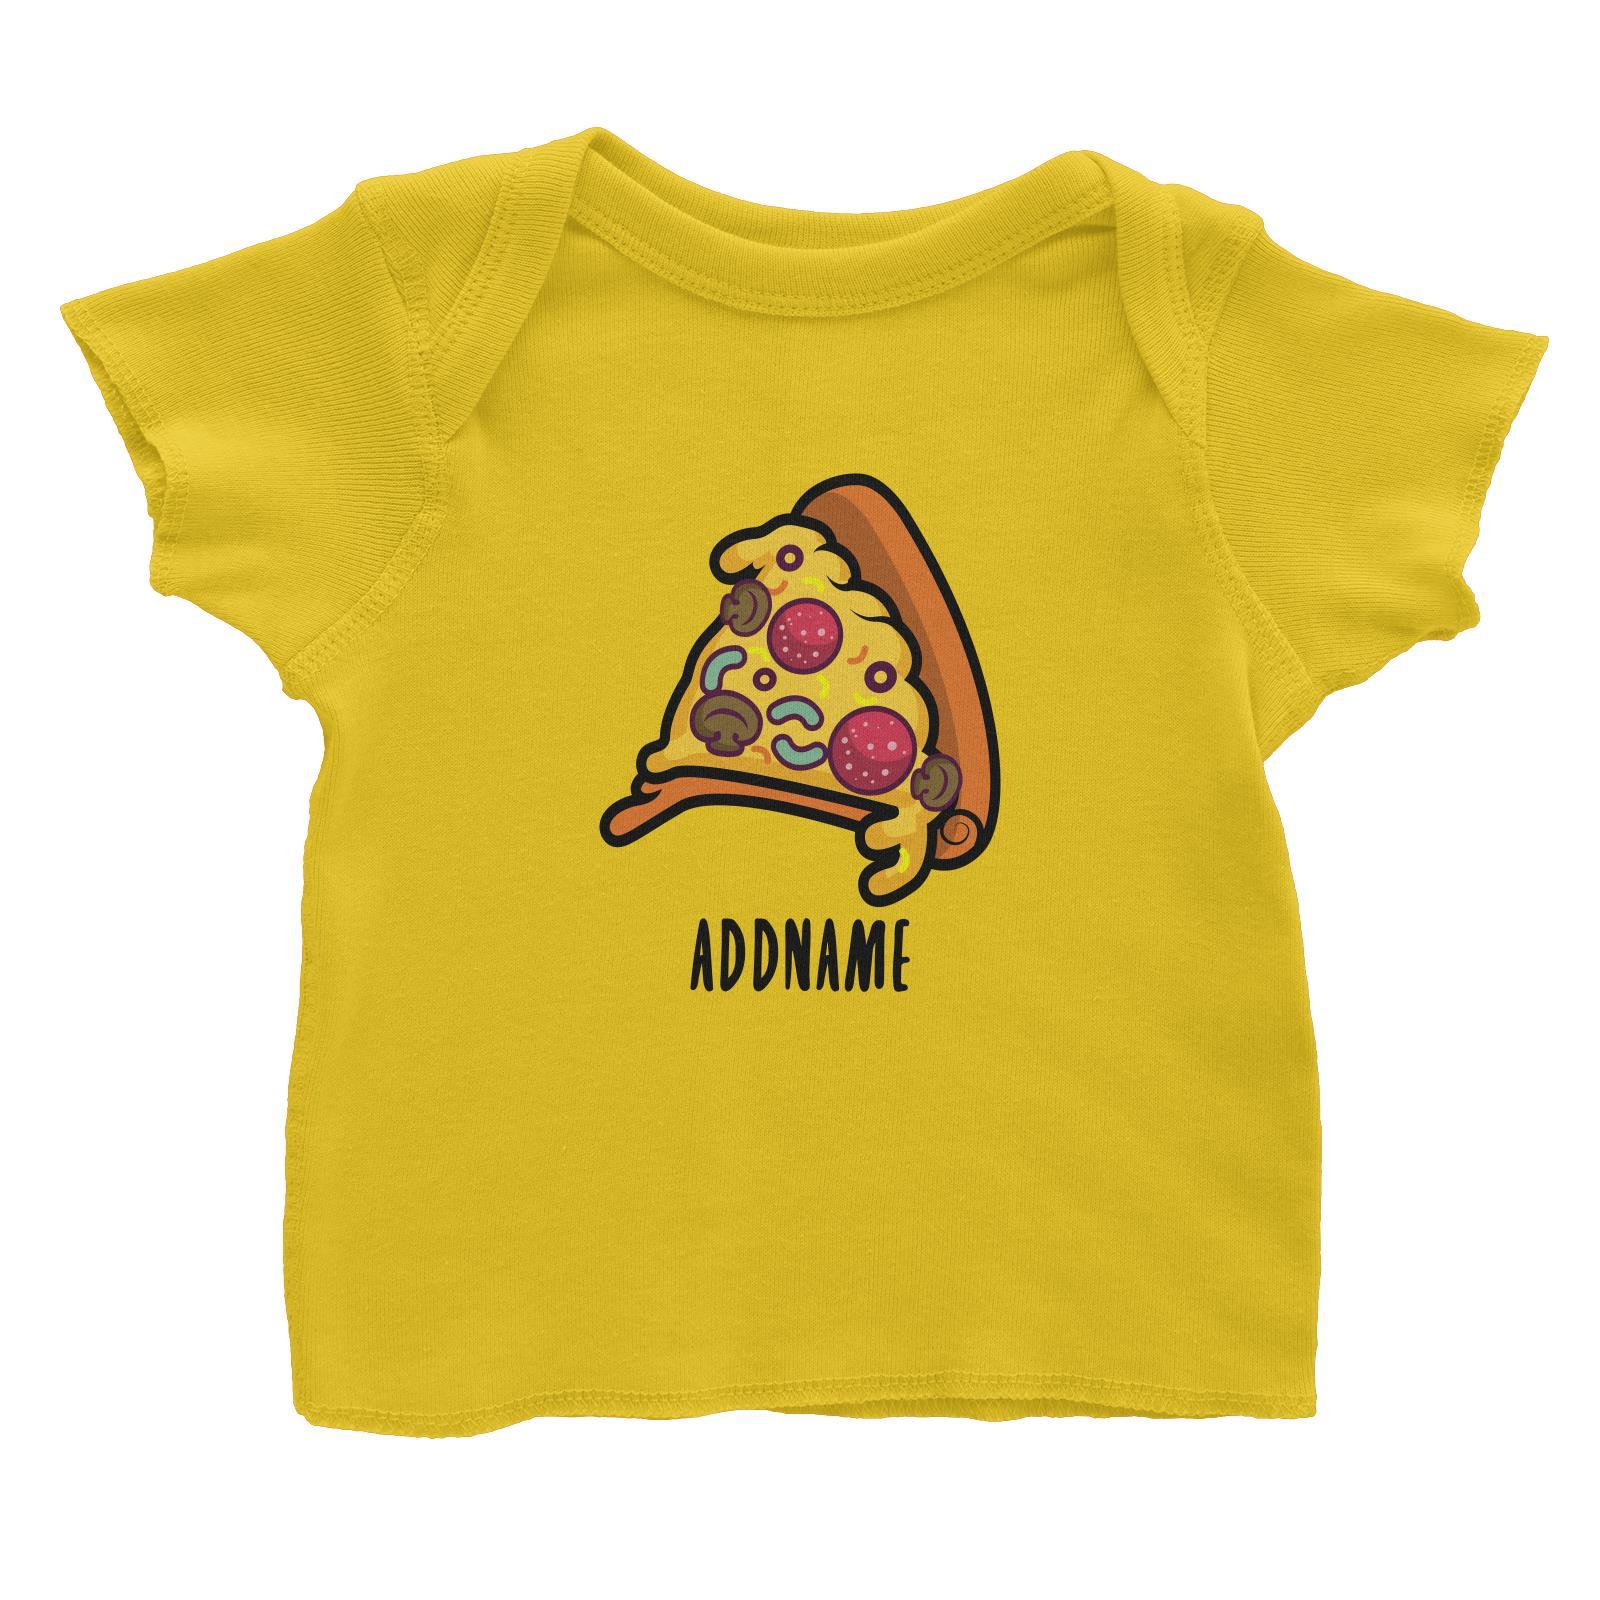 Fast Food Pizza Slice Addname Baby T-Shirt  Matching Family Comic Cartoon Personalizable Designs